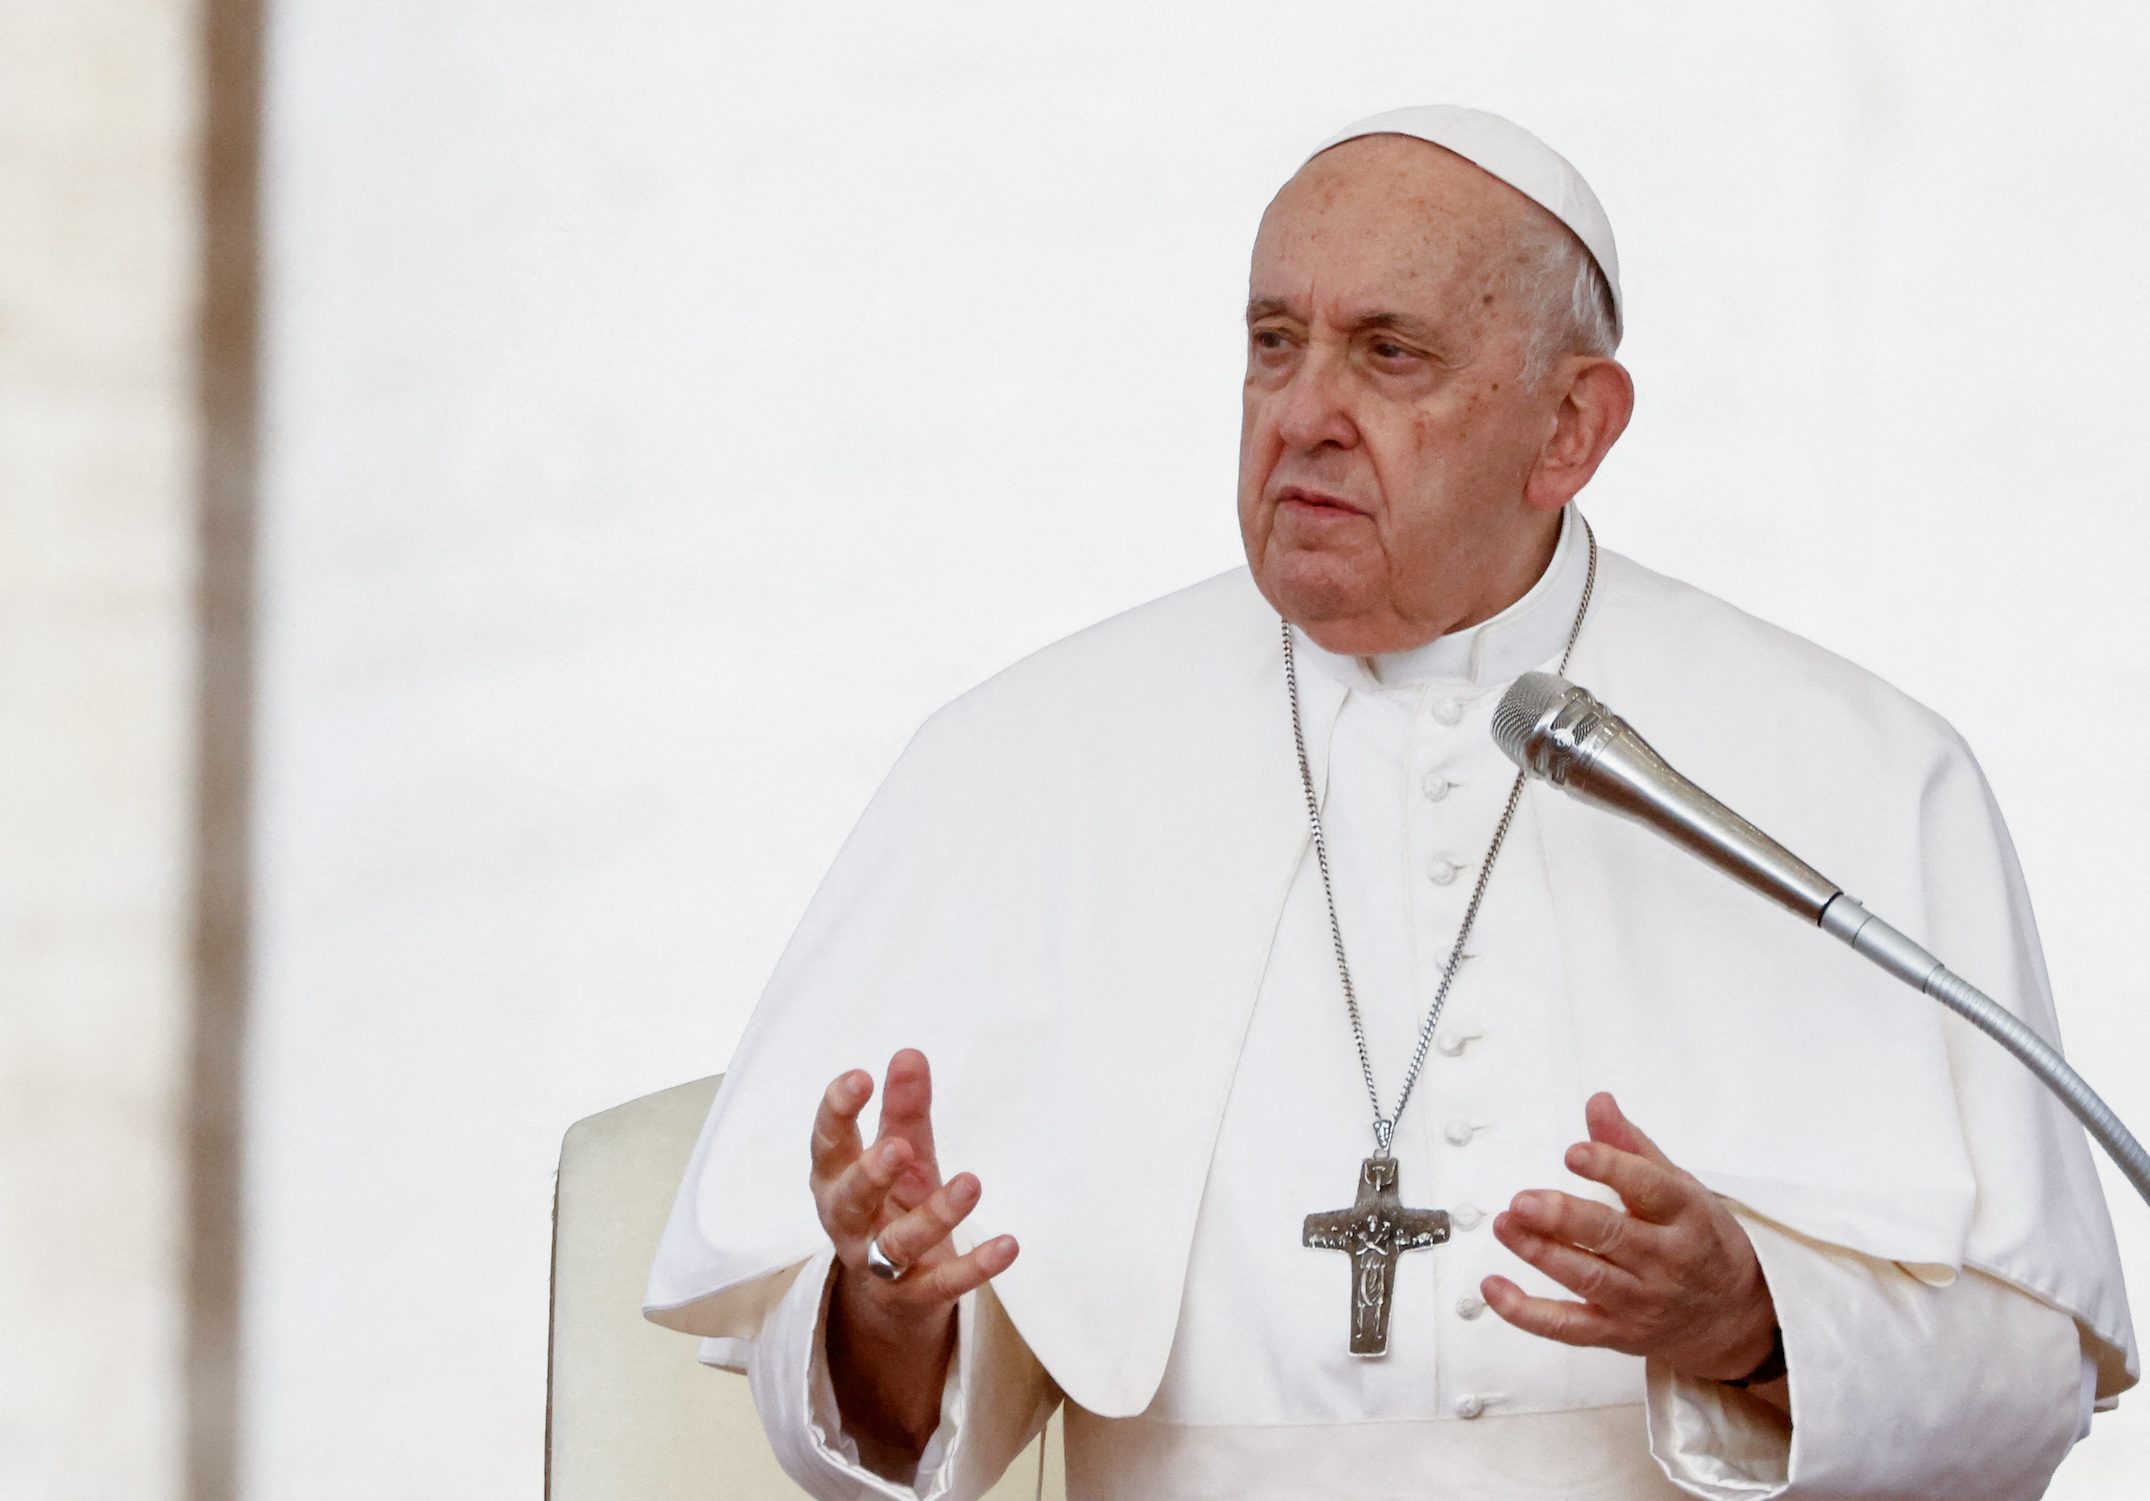 ‘Enough’ conflict, says Pope Francis as he calls for more aid to Gaza